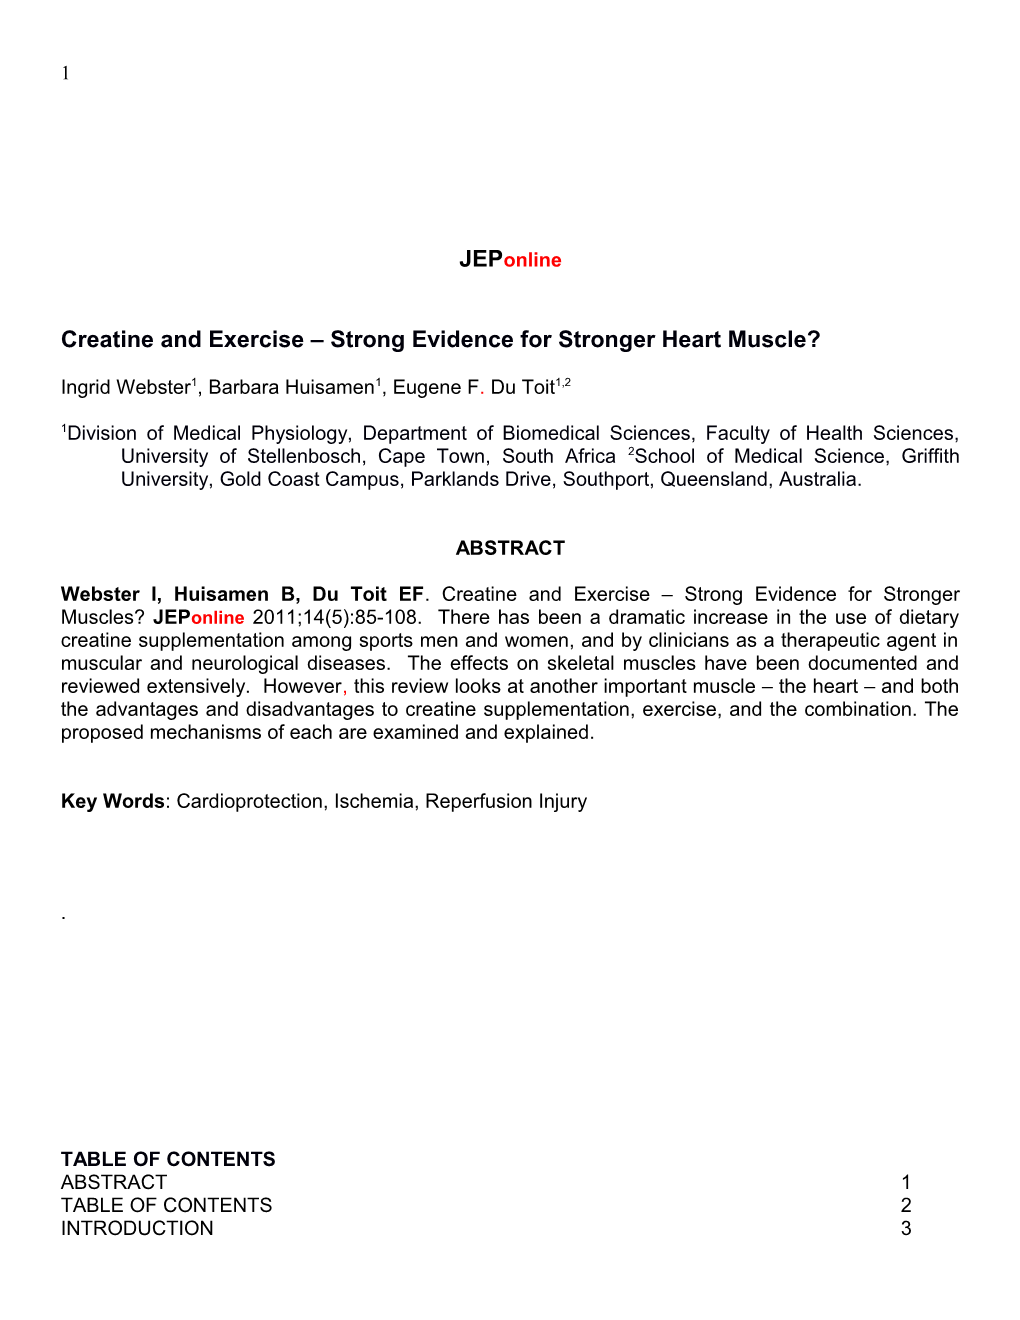 Creatine and Exercise Strong Evidence for Stronger Heart Muscle?